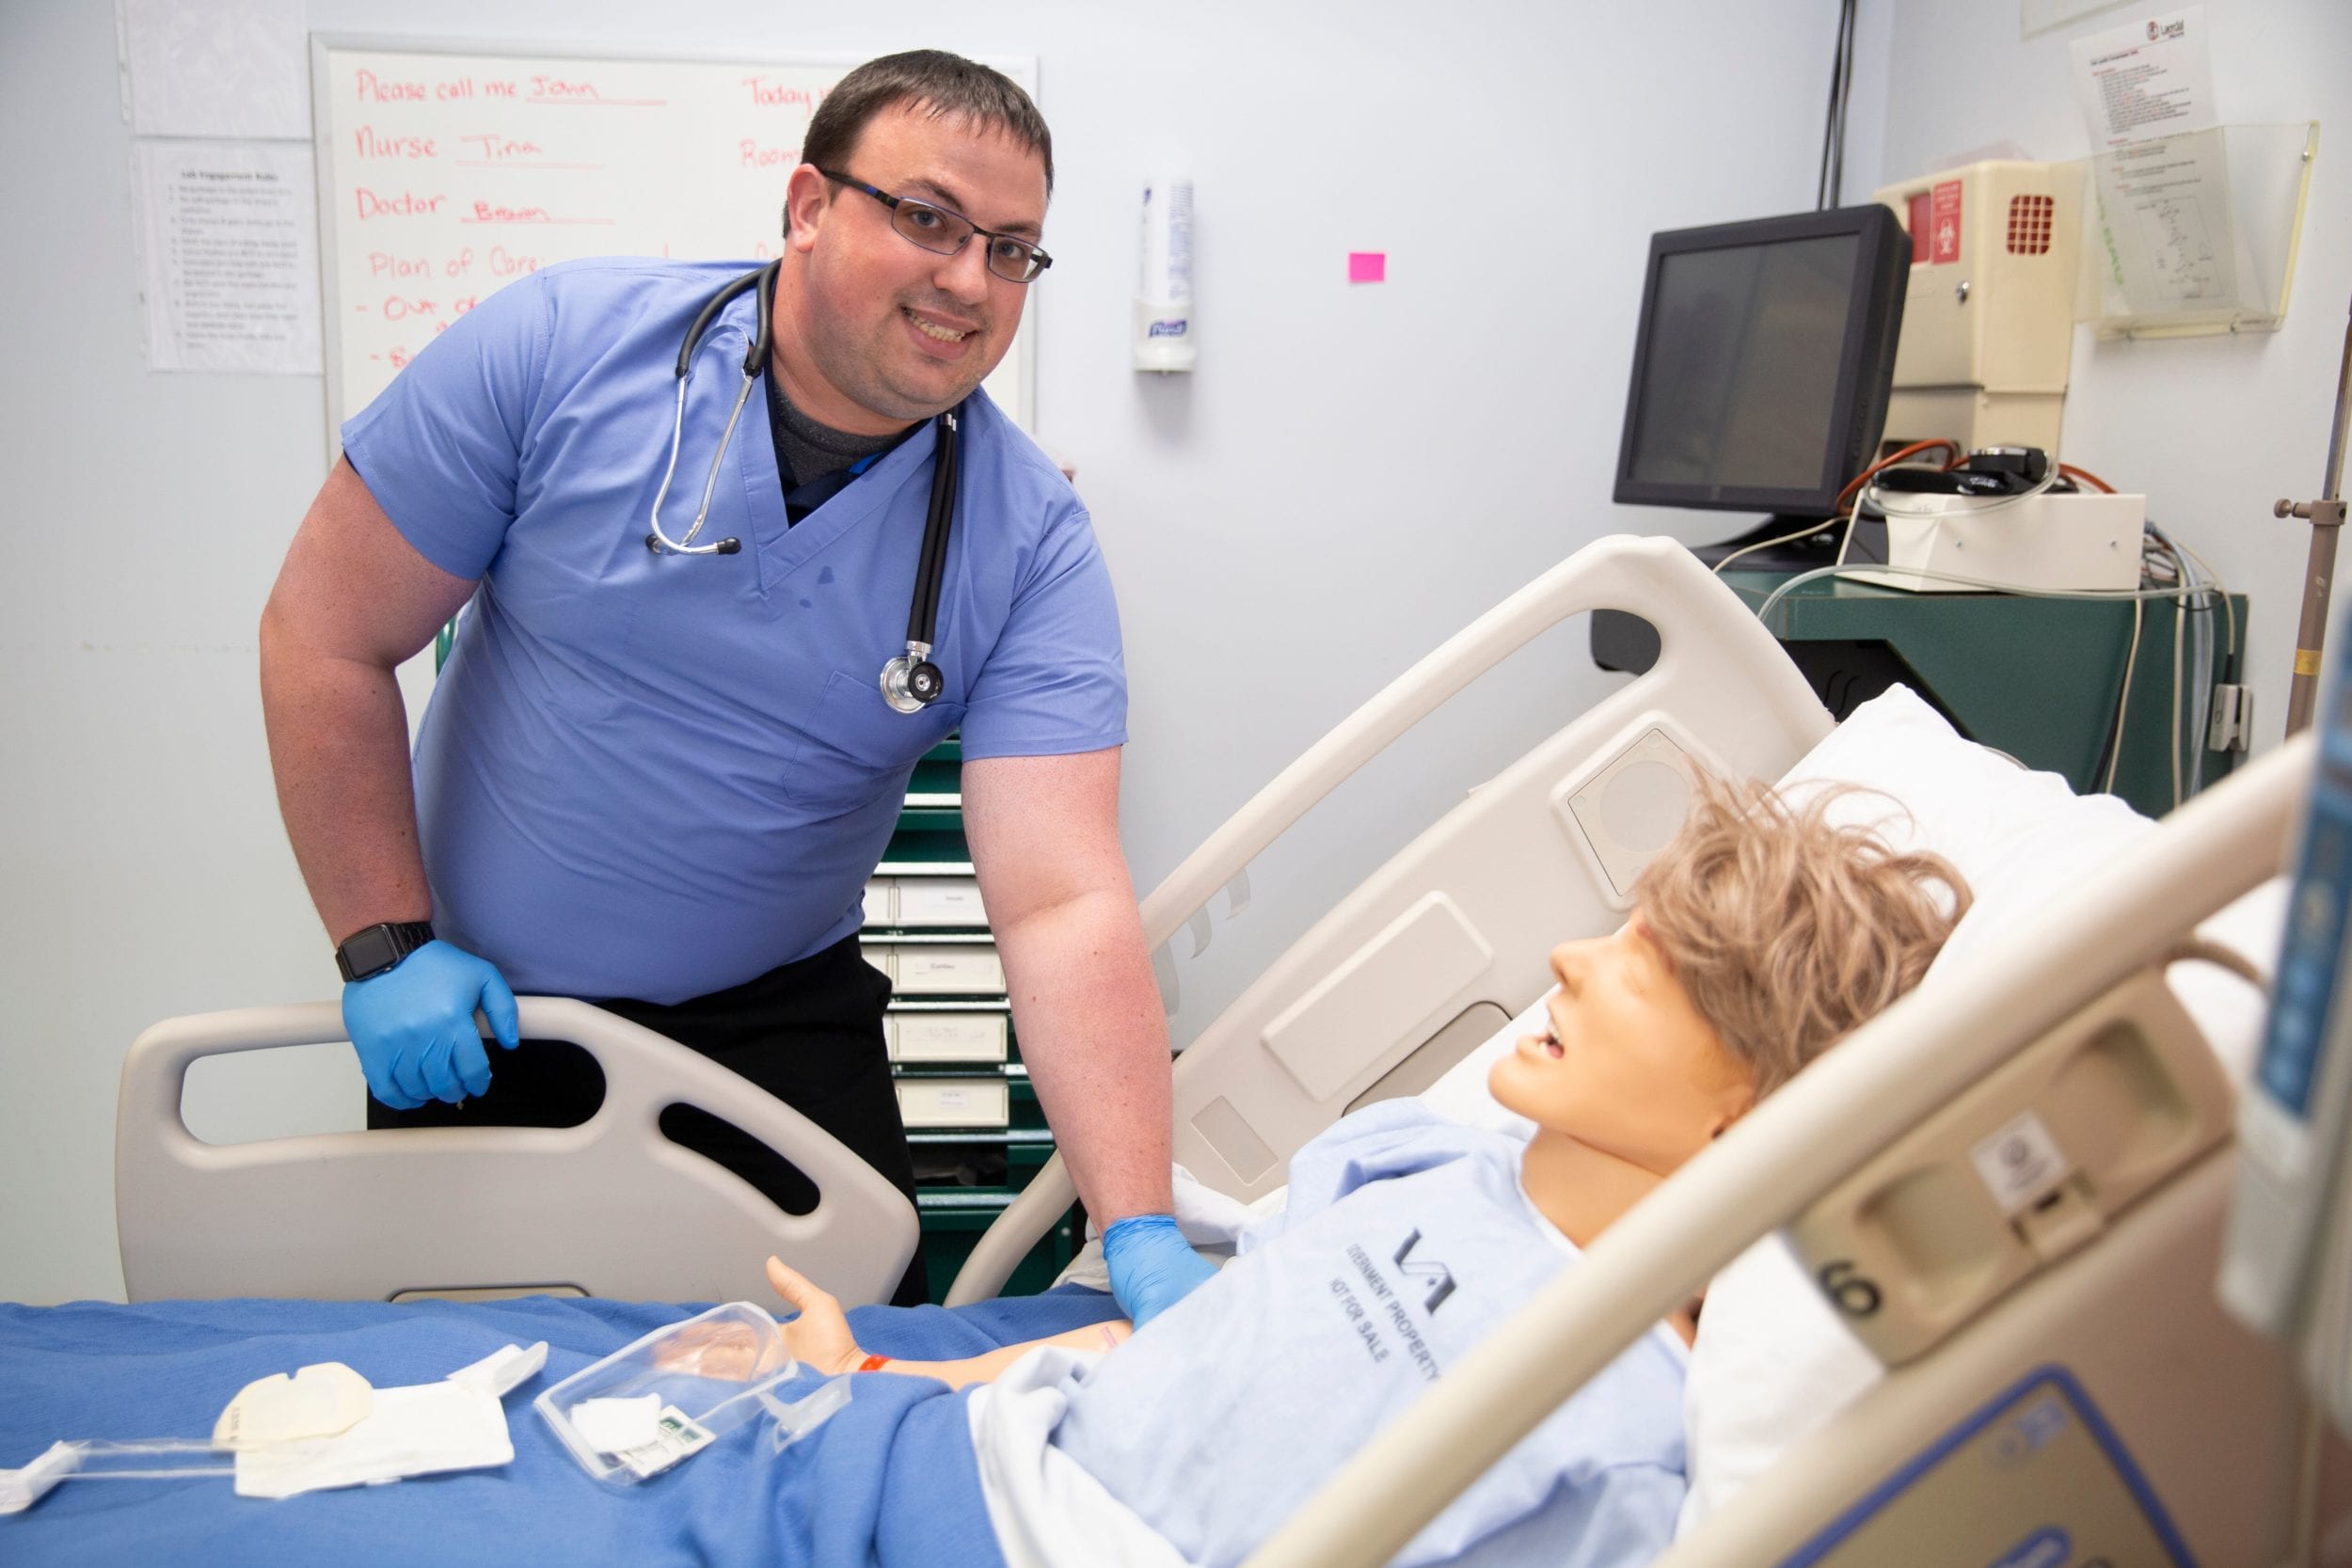 From paramedic to nurse: Tyler prepares for a different role in emergency medicine